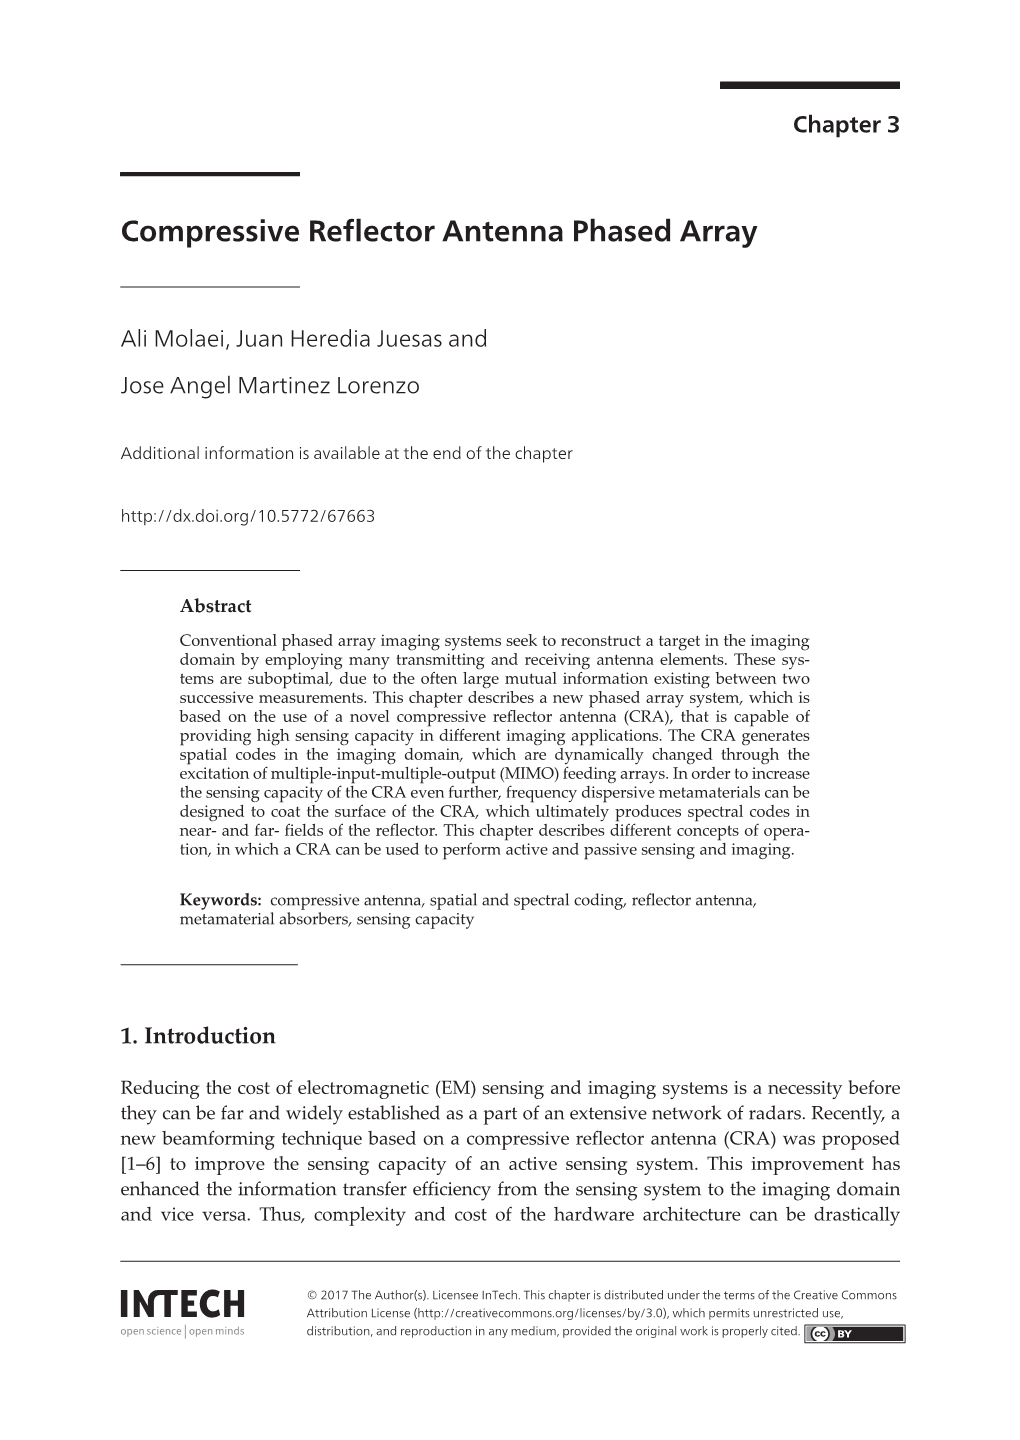 Compressive Reflector Antenna Phased Array